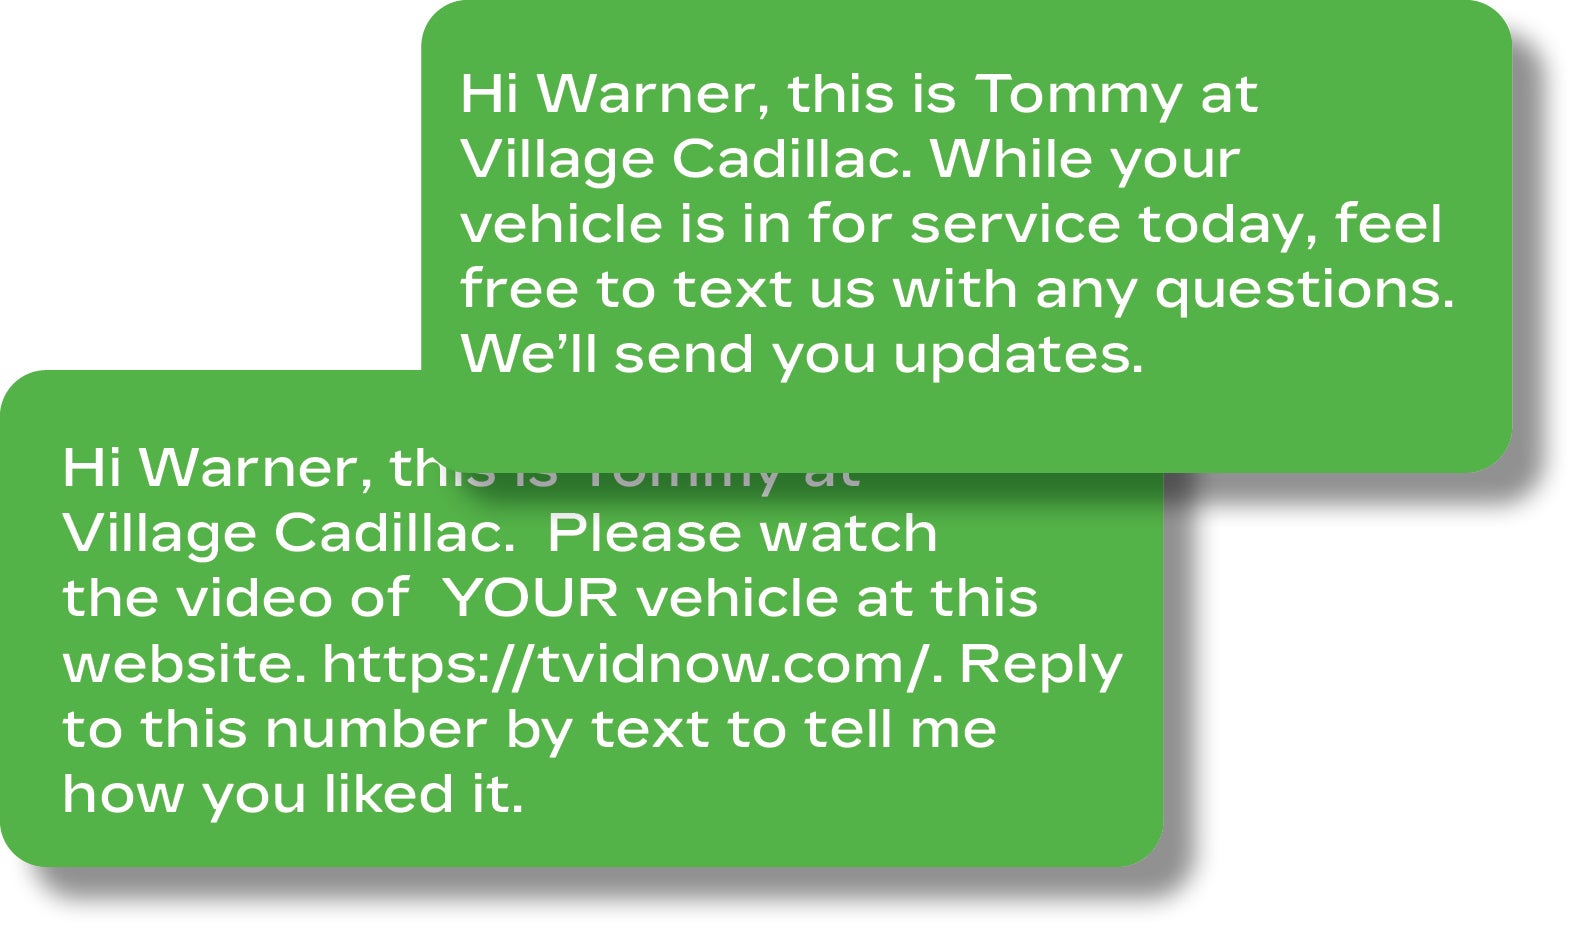 sms text about Village Cadillac and thier new video service